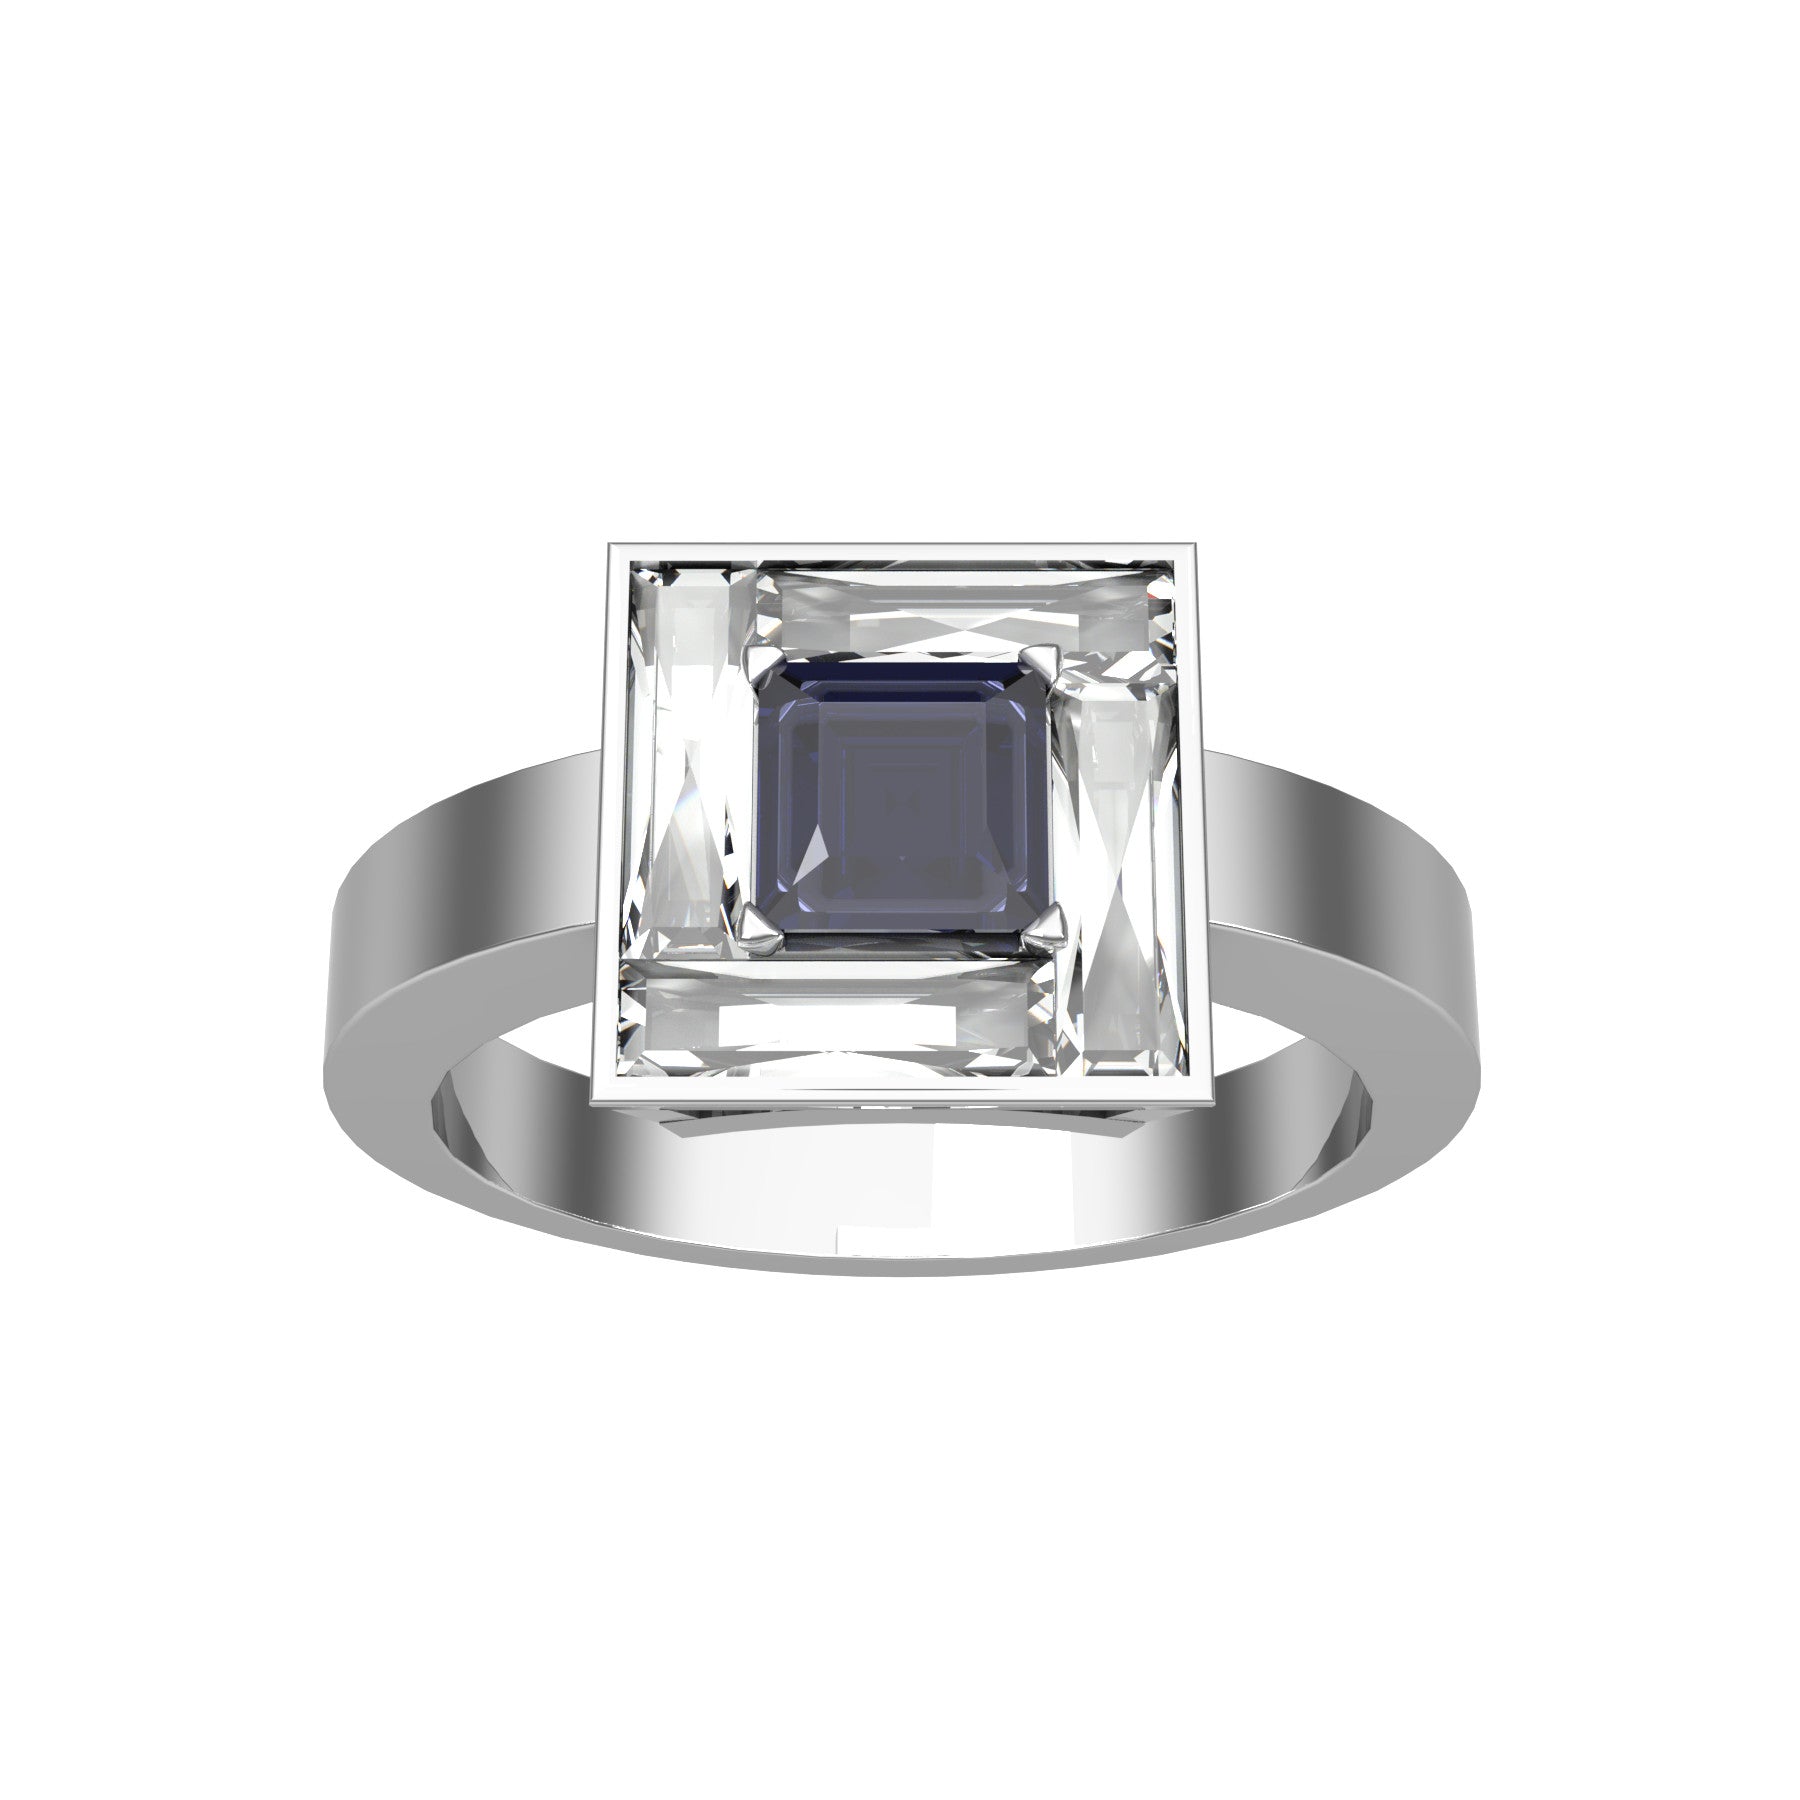 true passion ring, 18 K white gold, about 0,34 ct square emerald natural sapphire, natural baguette diamonds, weight about 4,8 g. (0.17 oz), width 9,3 mm max